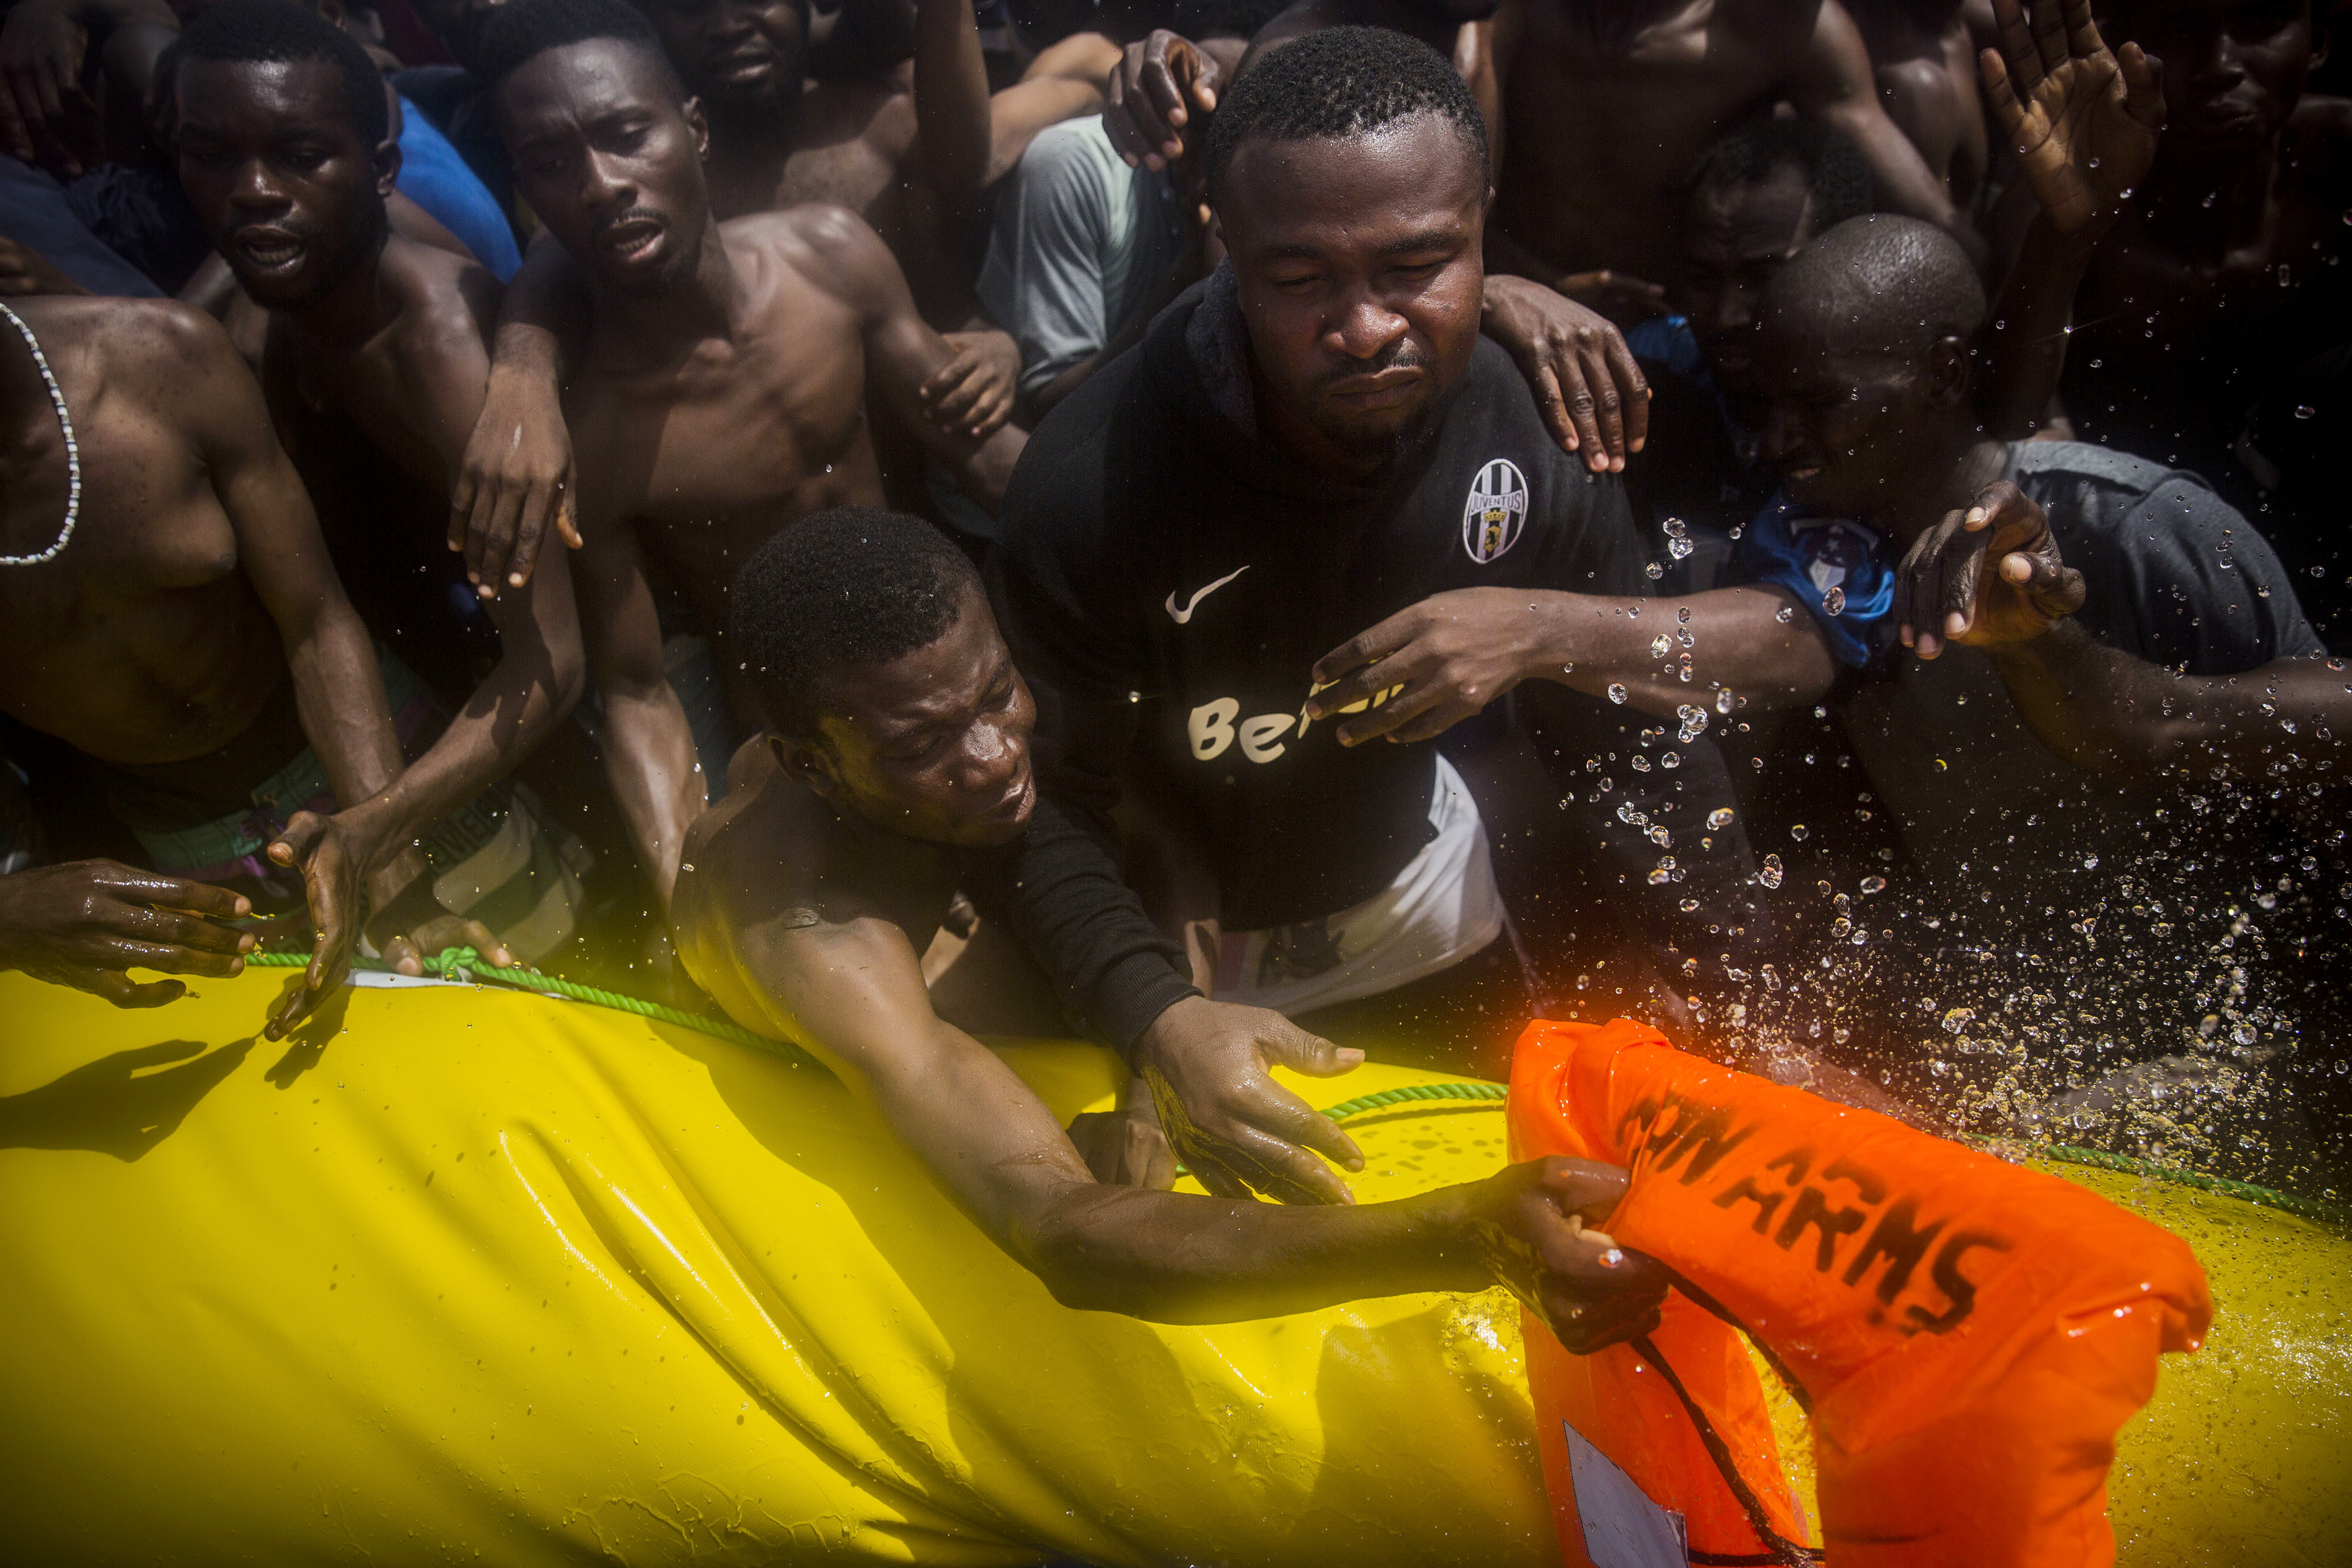 Sub saharan migrants receive life jackets as they are rescued by aid workers of Spanish NGO Proactiva Open Arms in the Mediterranean Sea, about 15 miles north of Sabratha, Libya on Tuesday, July 25, 2017. (AP Photo/Santi Palacios)